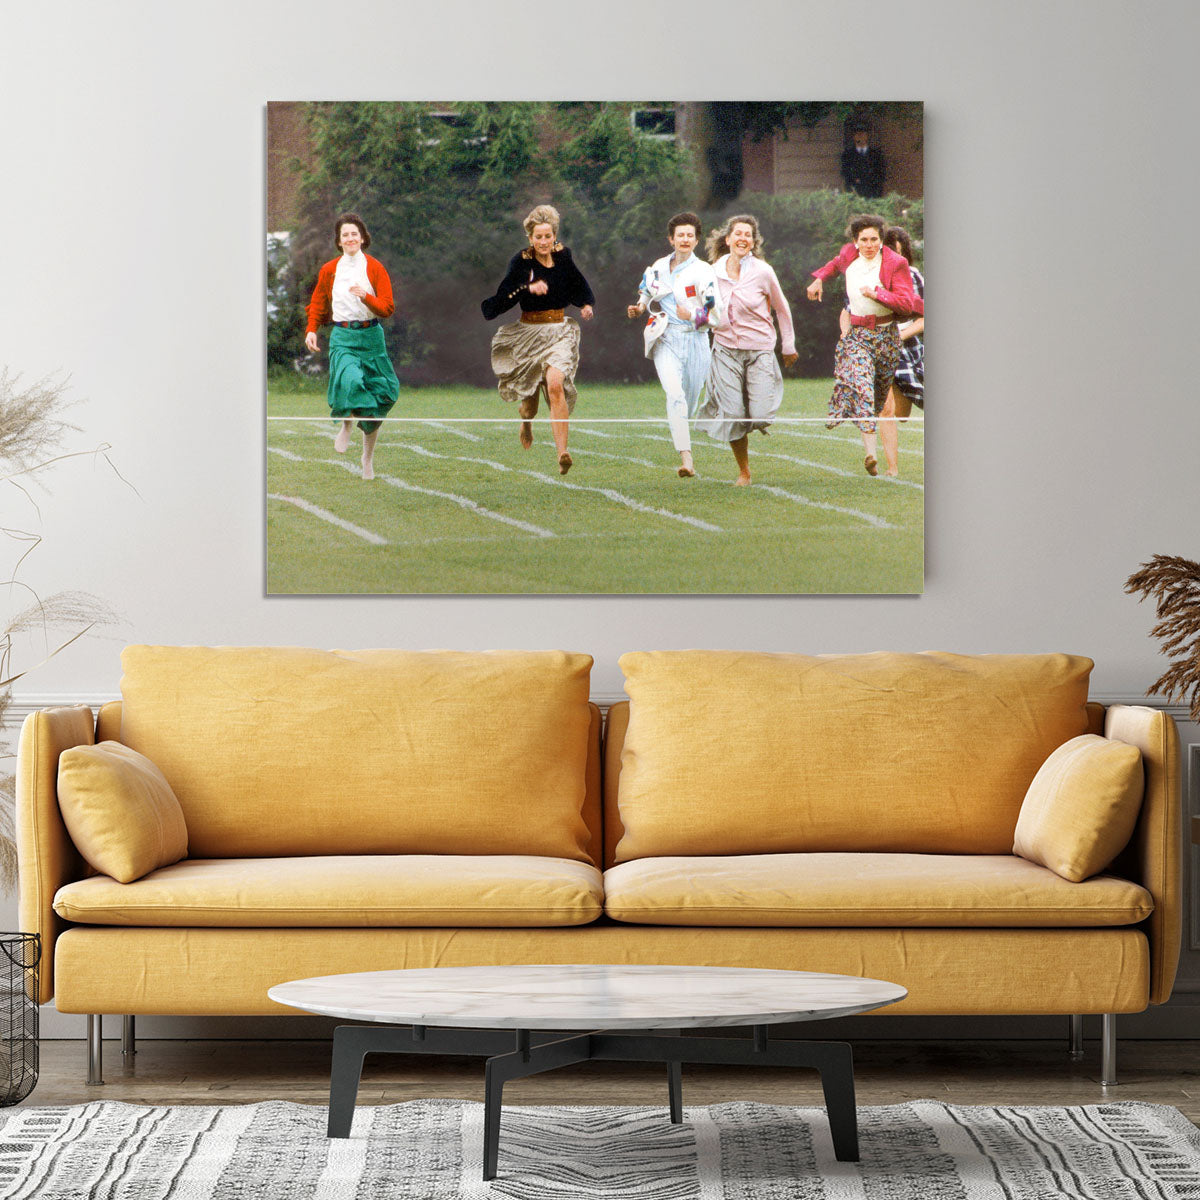 Princess Diana in the mothers race at Harrys school Canvas Print or Poster - Canvas Art Rocks - 4